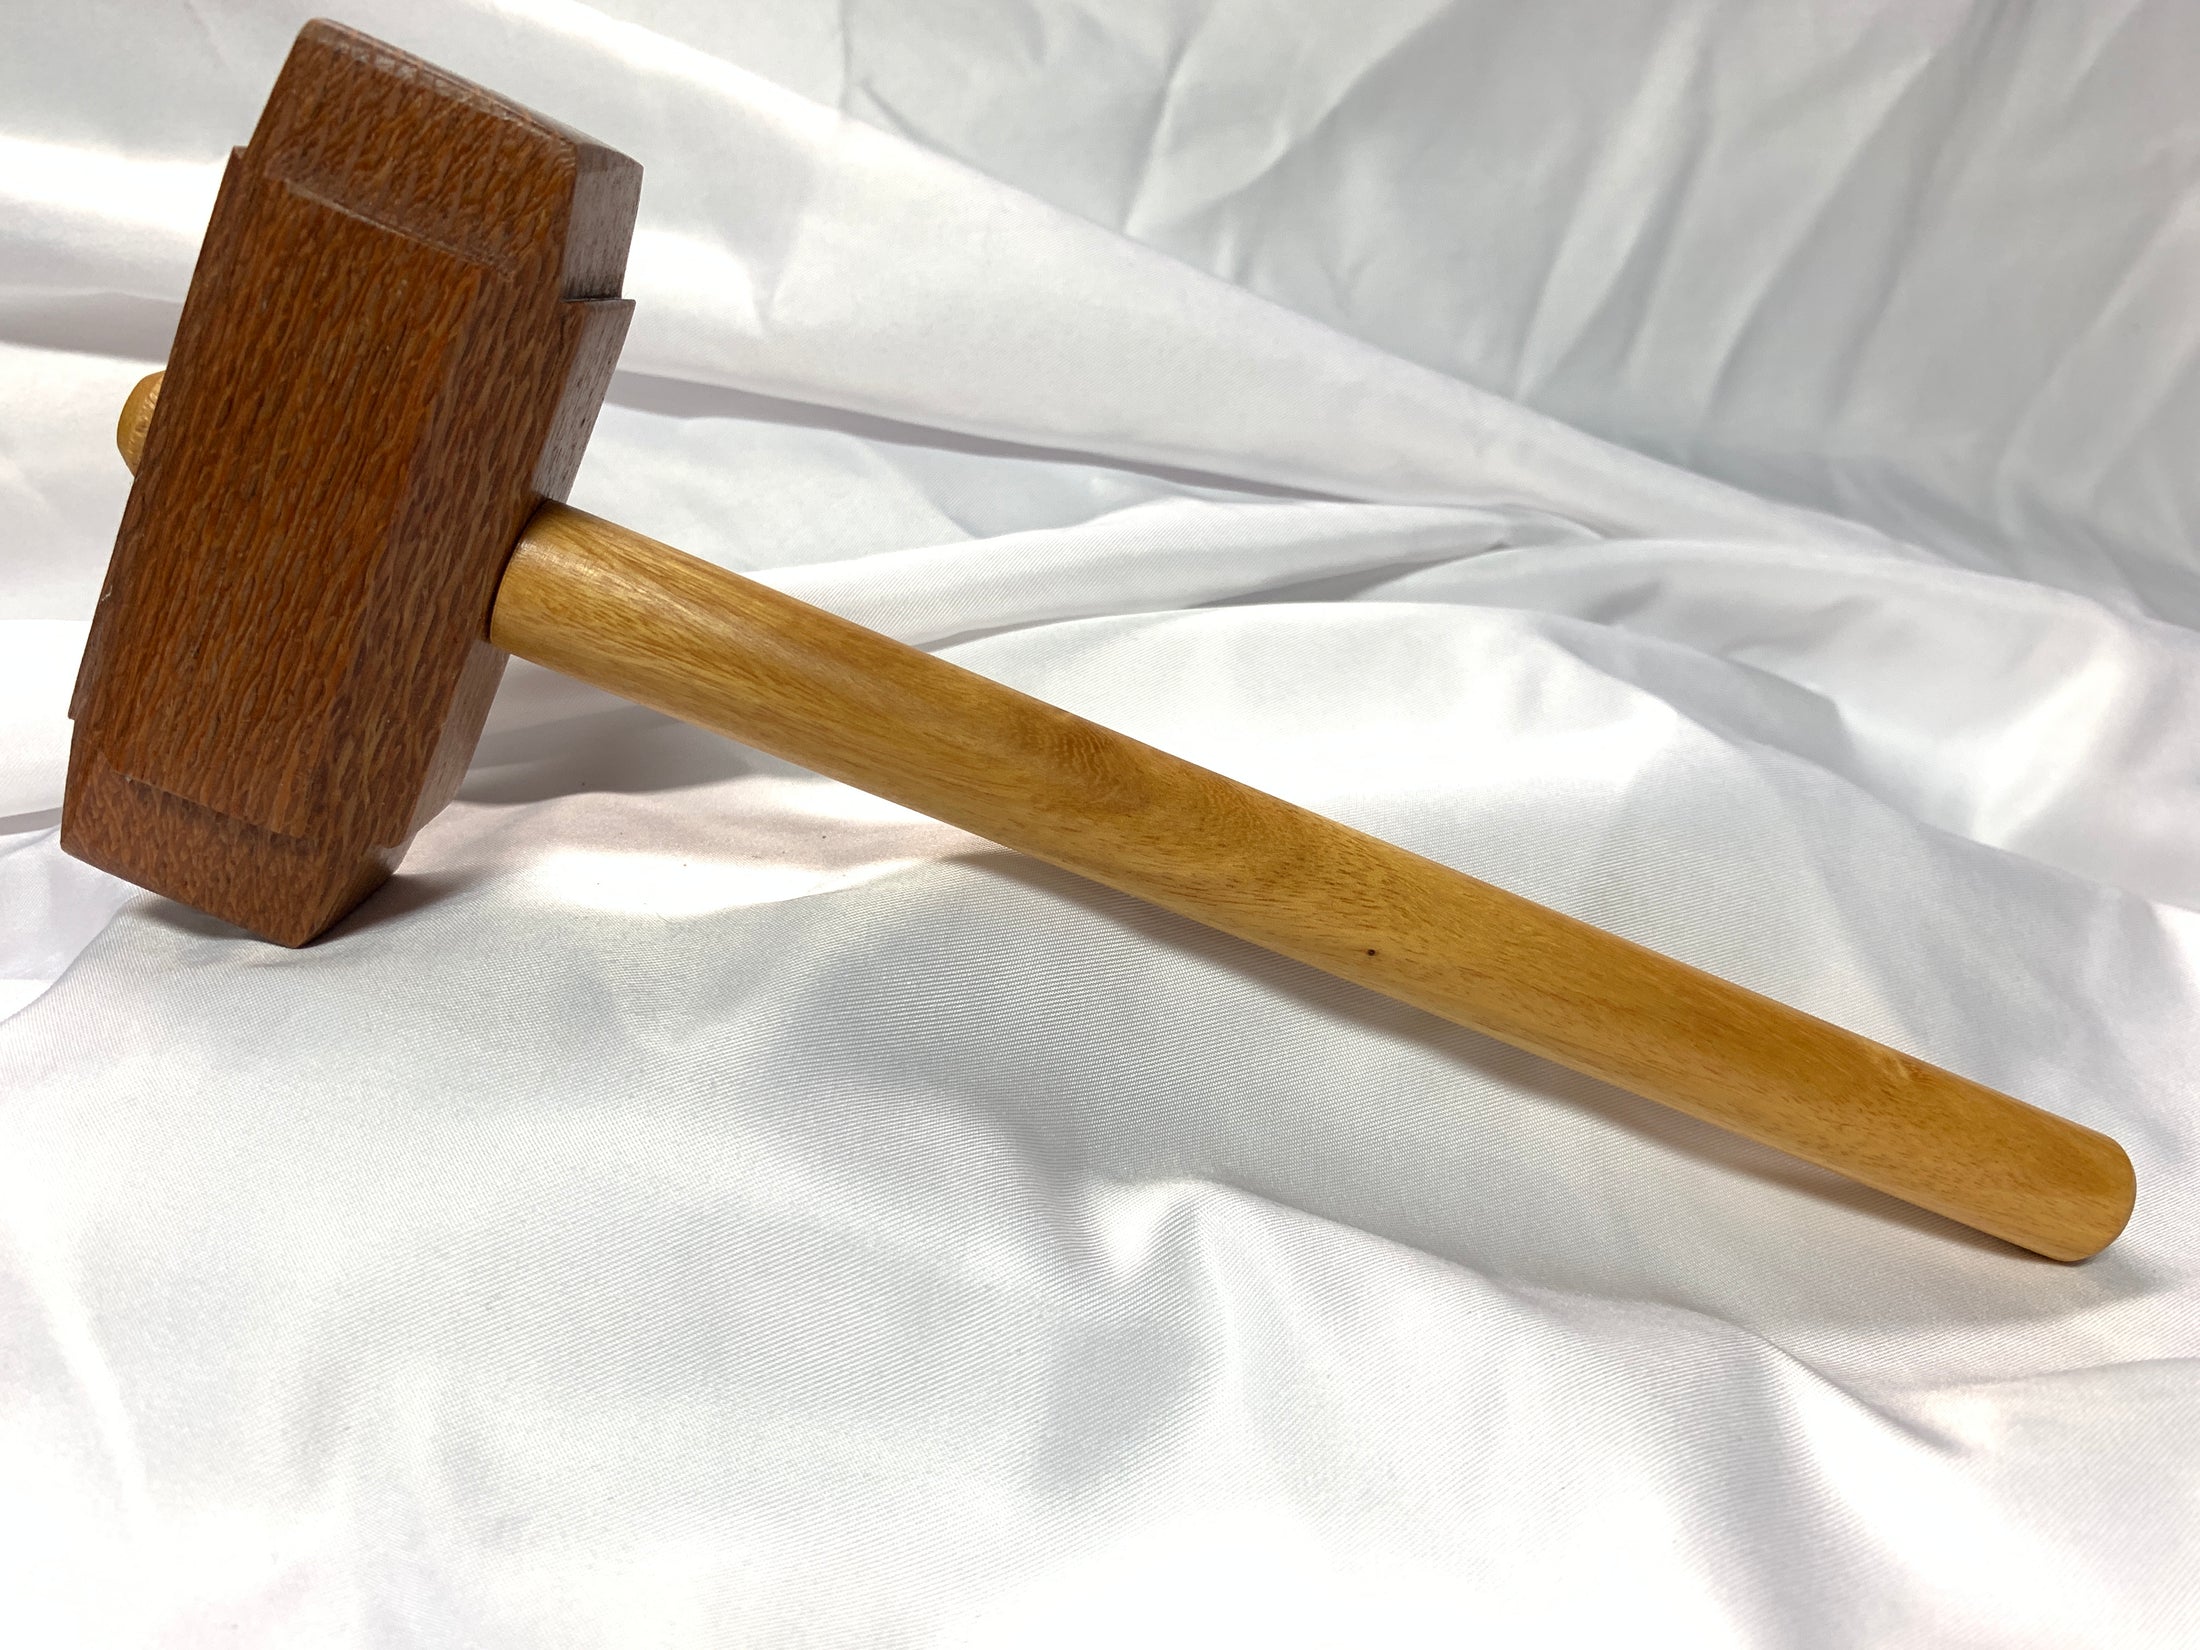 Thors Hammer Woodworking Mallet Leopardwood Head with Osage Orange Handle Kings Fine Woodworking